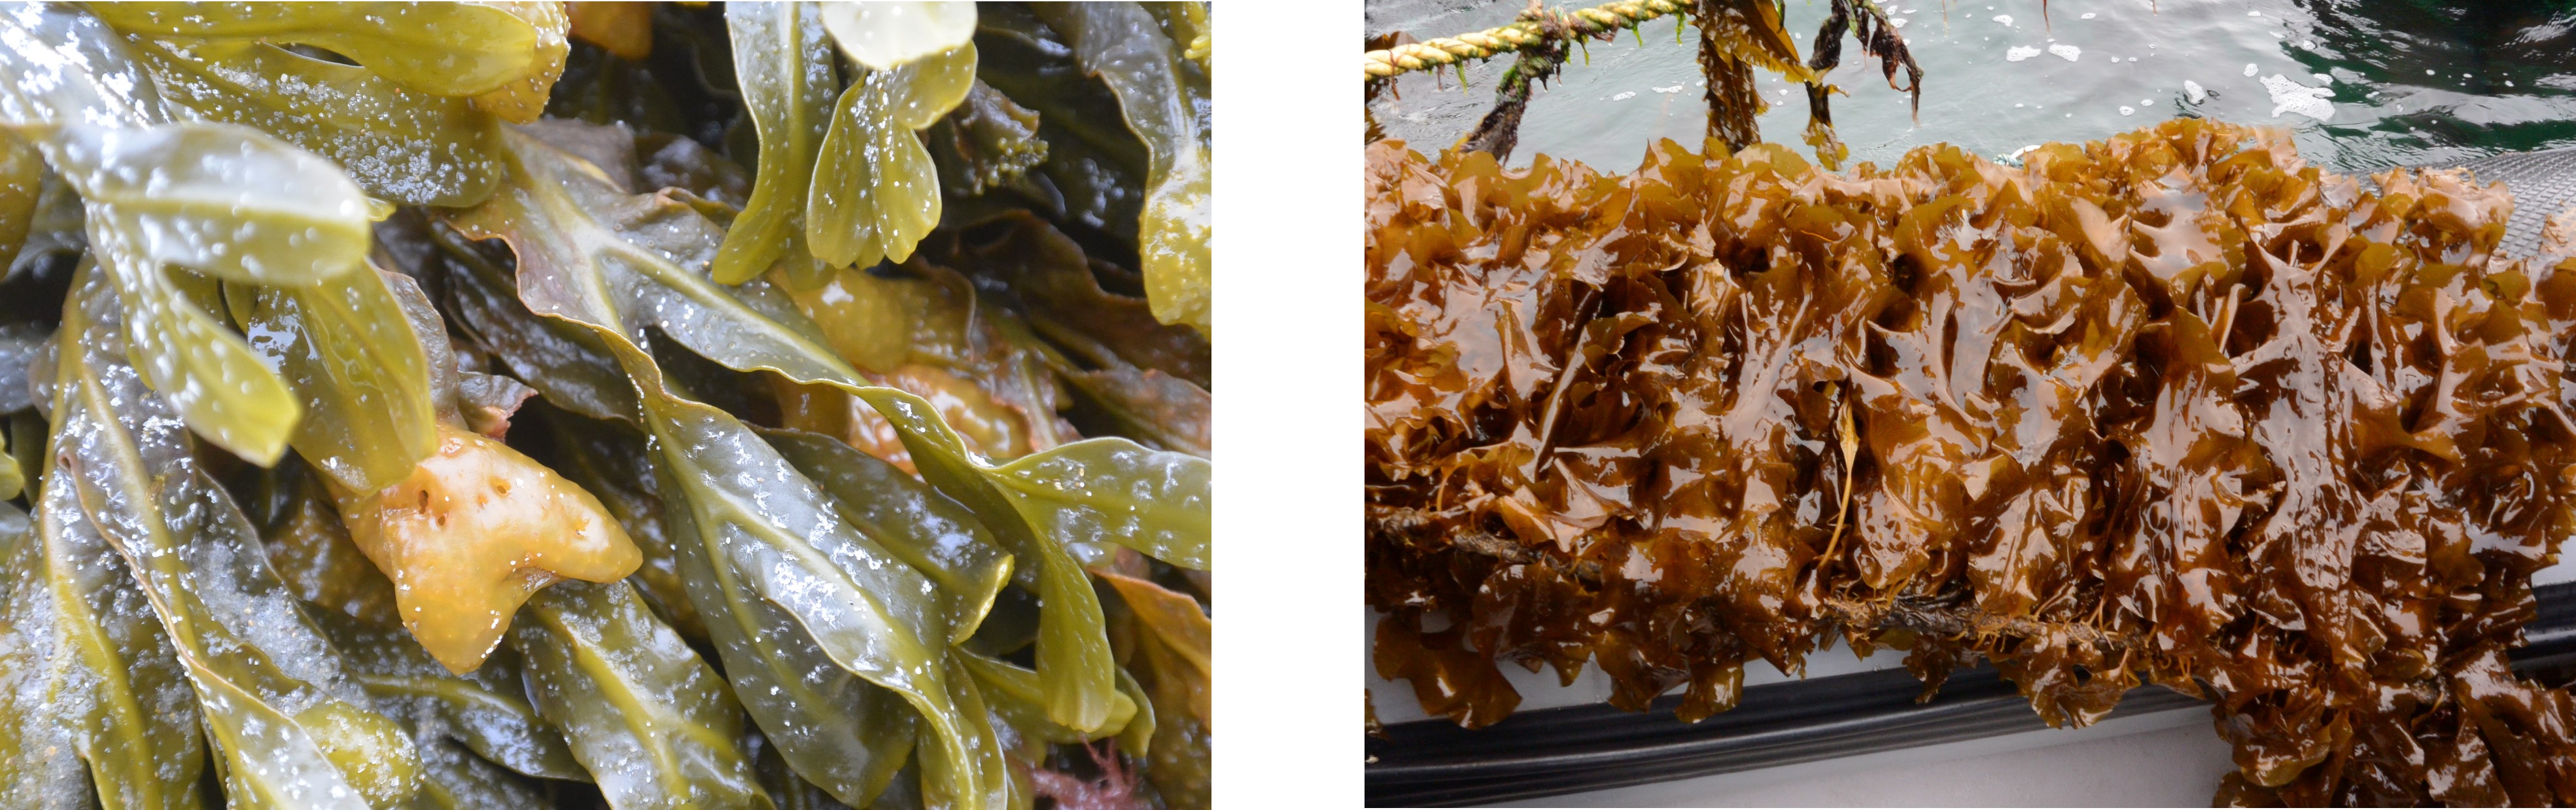 two types of seaweed